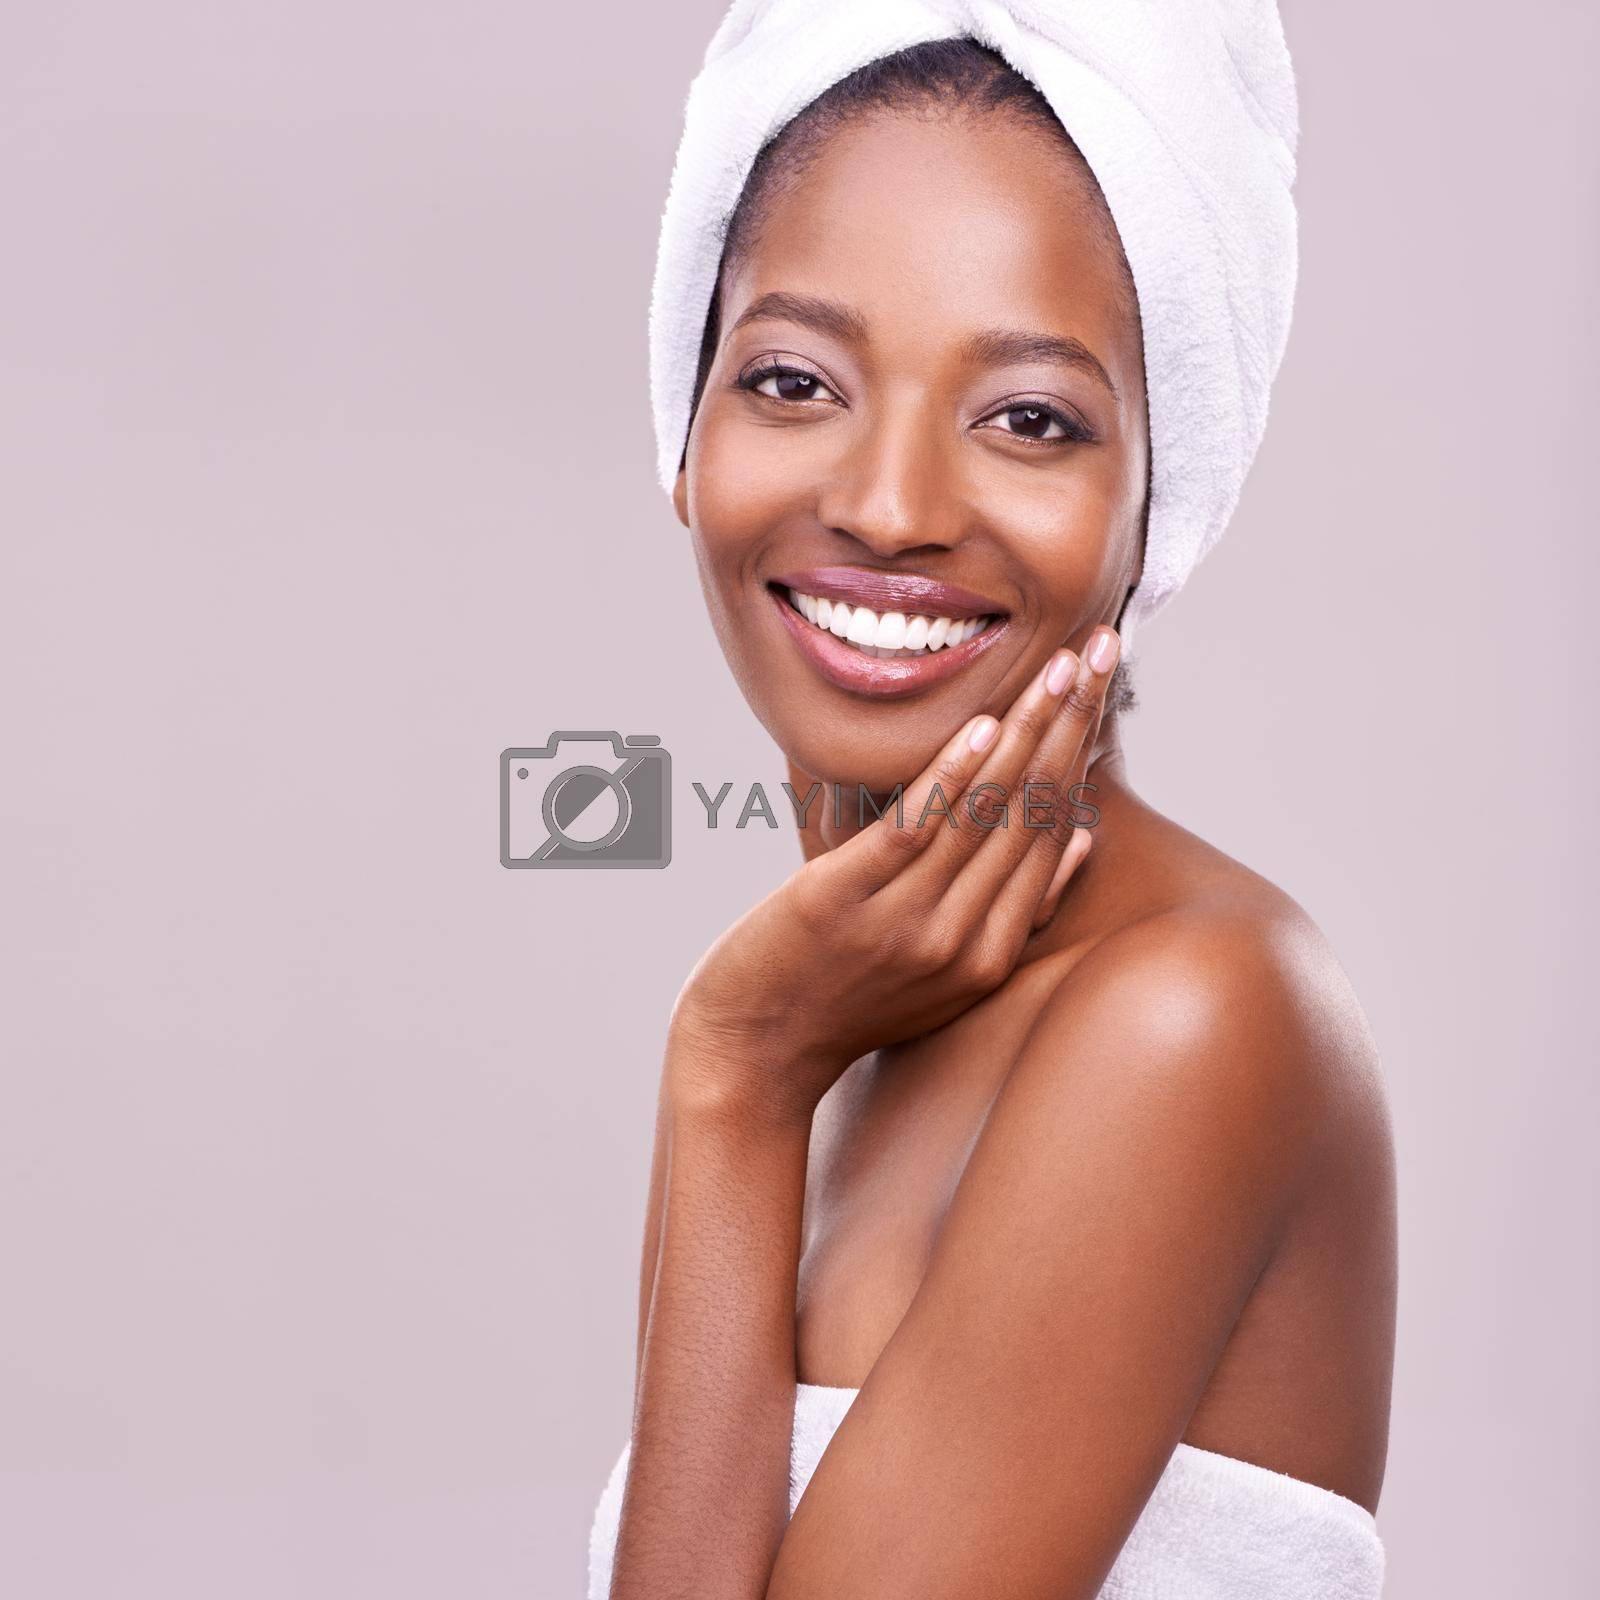 An isolated studio portrait of a beautiful young woman wearing a towel on her head.